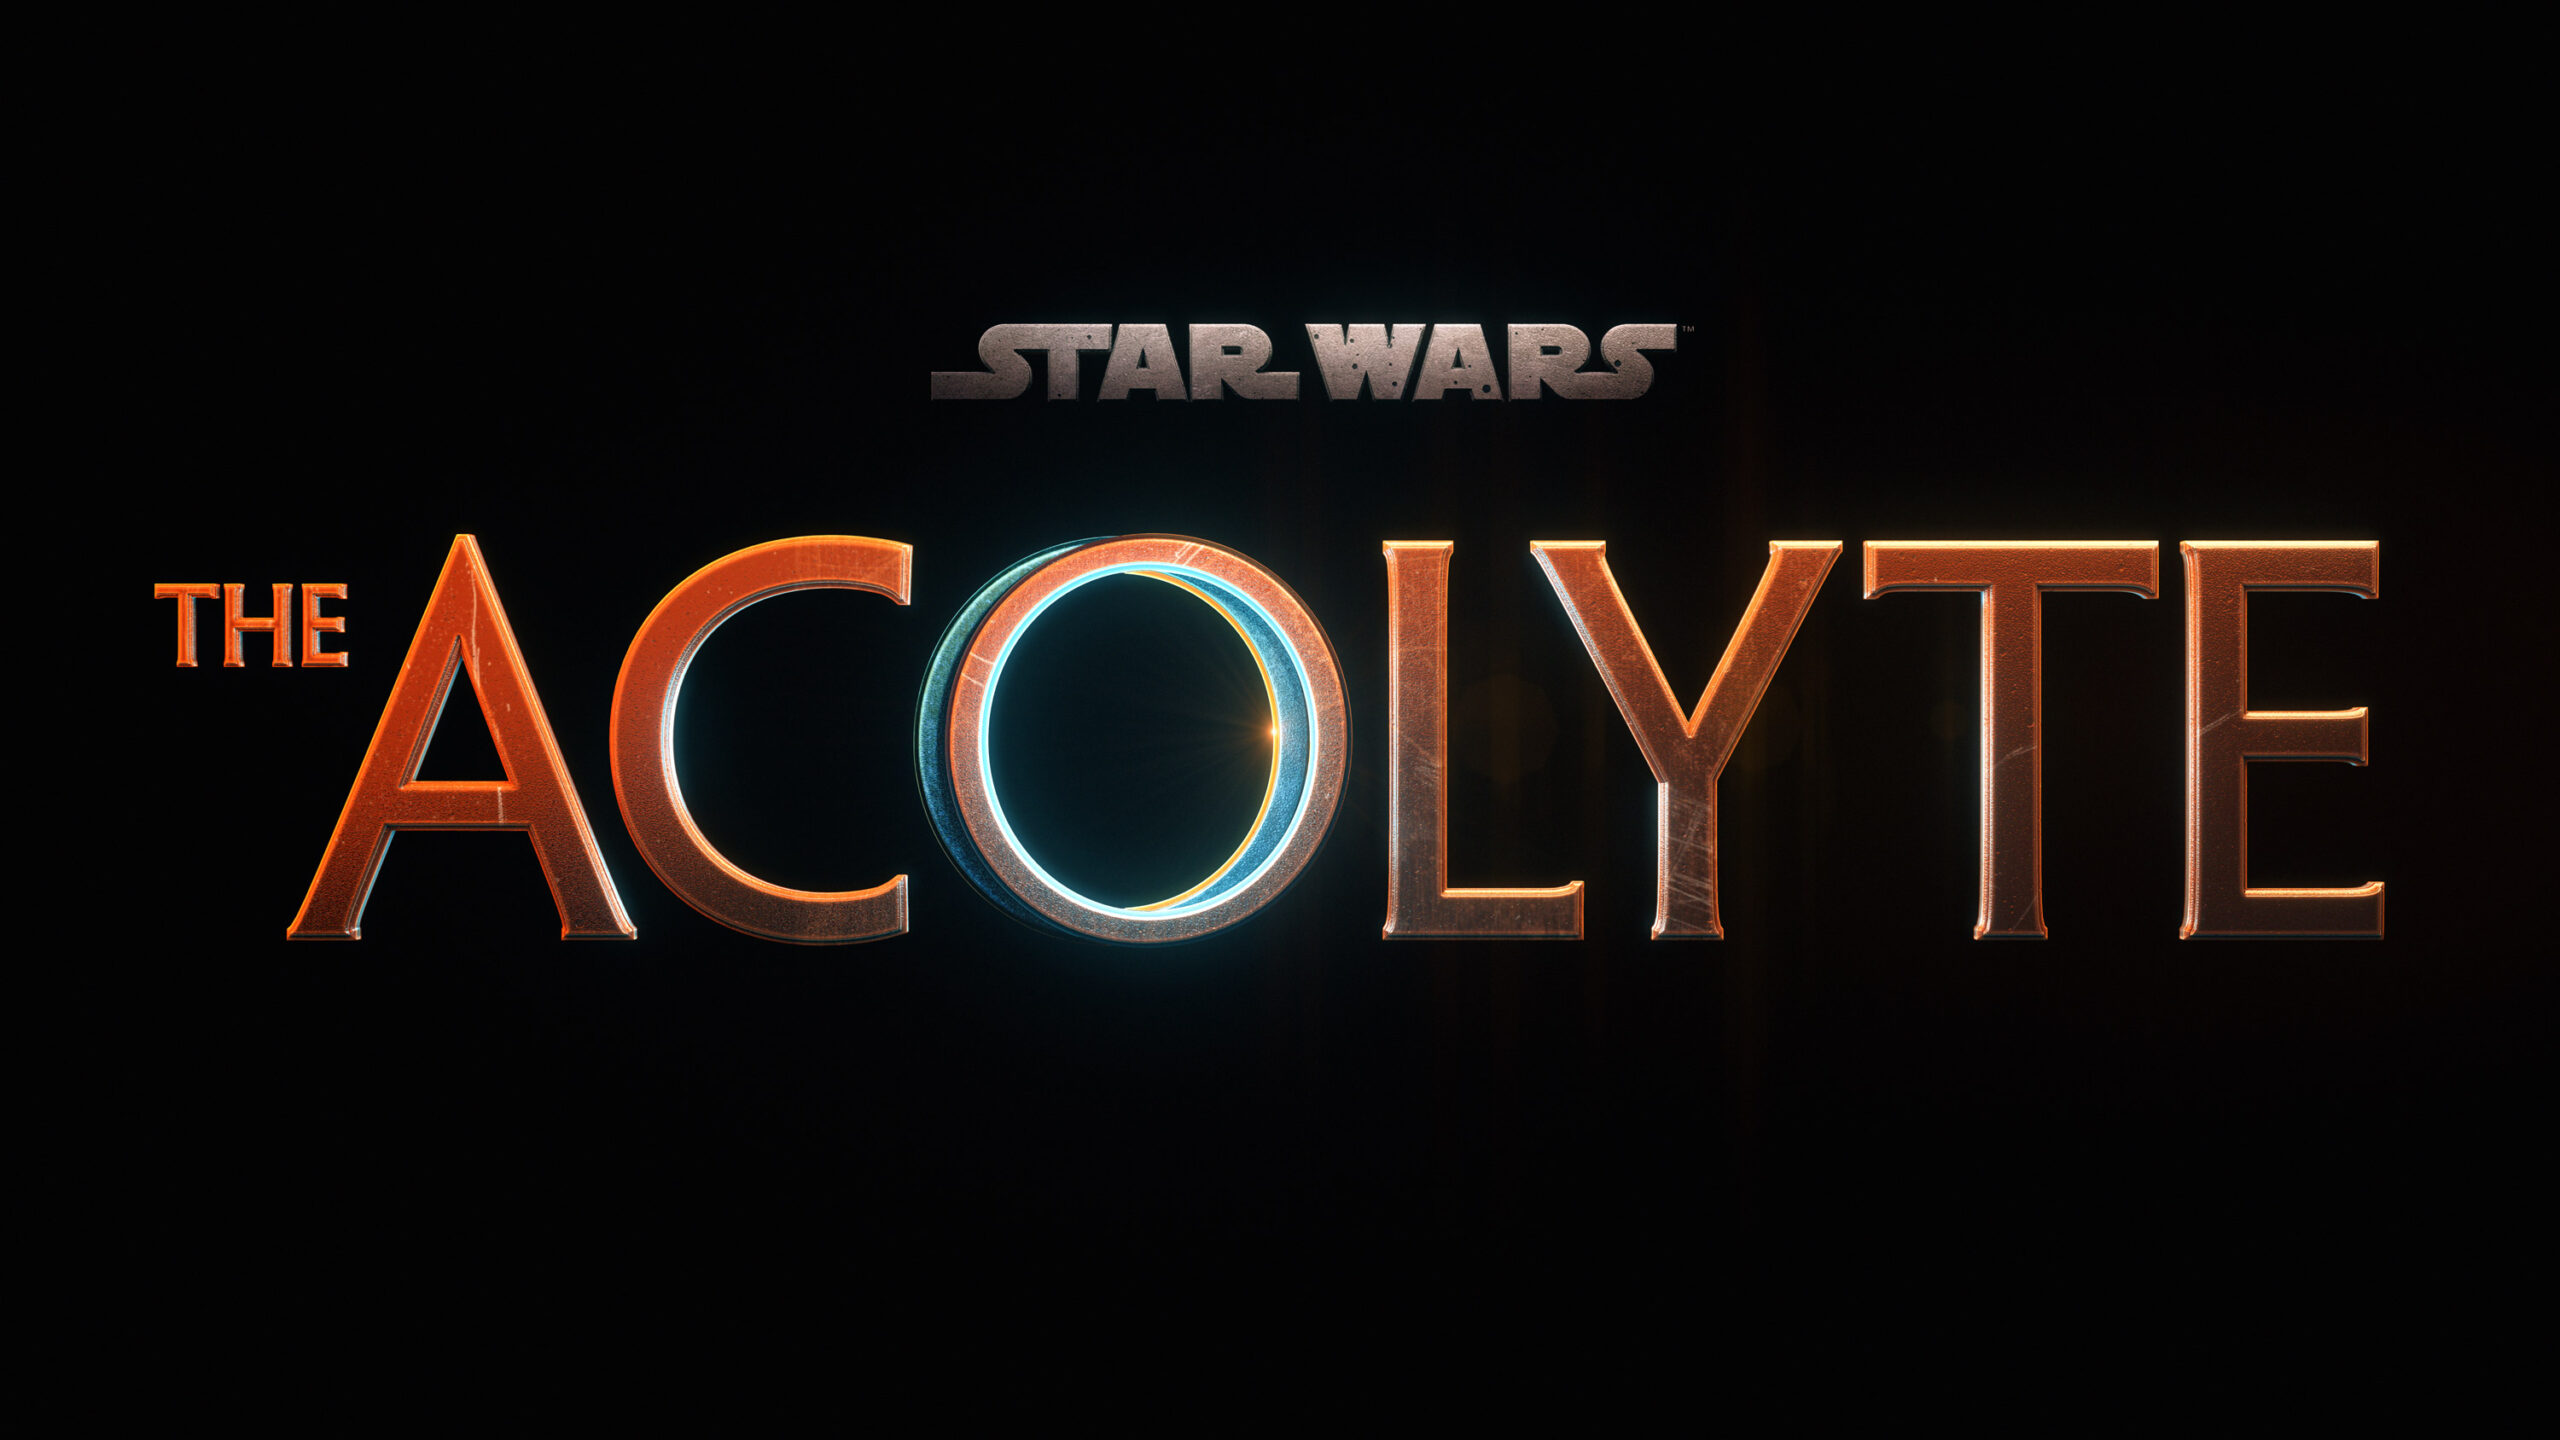 The Alycote - logo [credit: Copyright 2023 Lucasfilm Ltd. and TM. All Rights Reserved; courtesy of Disney]